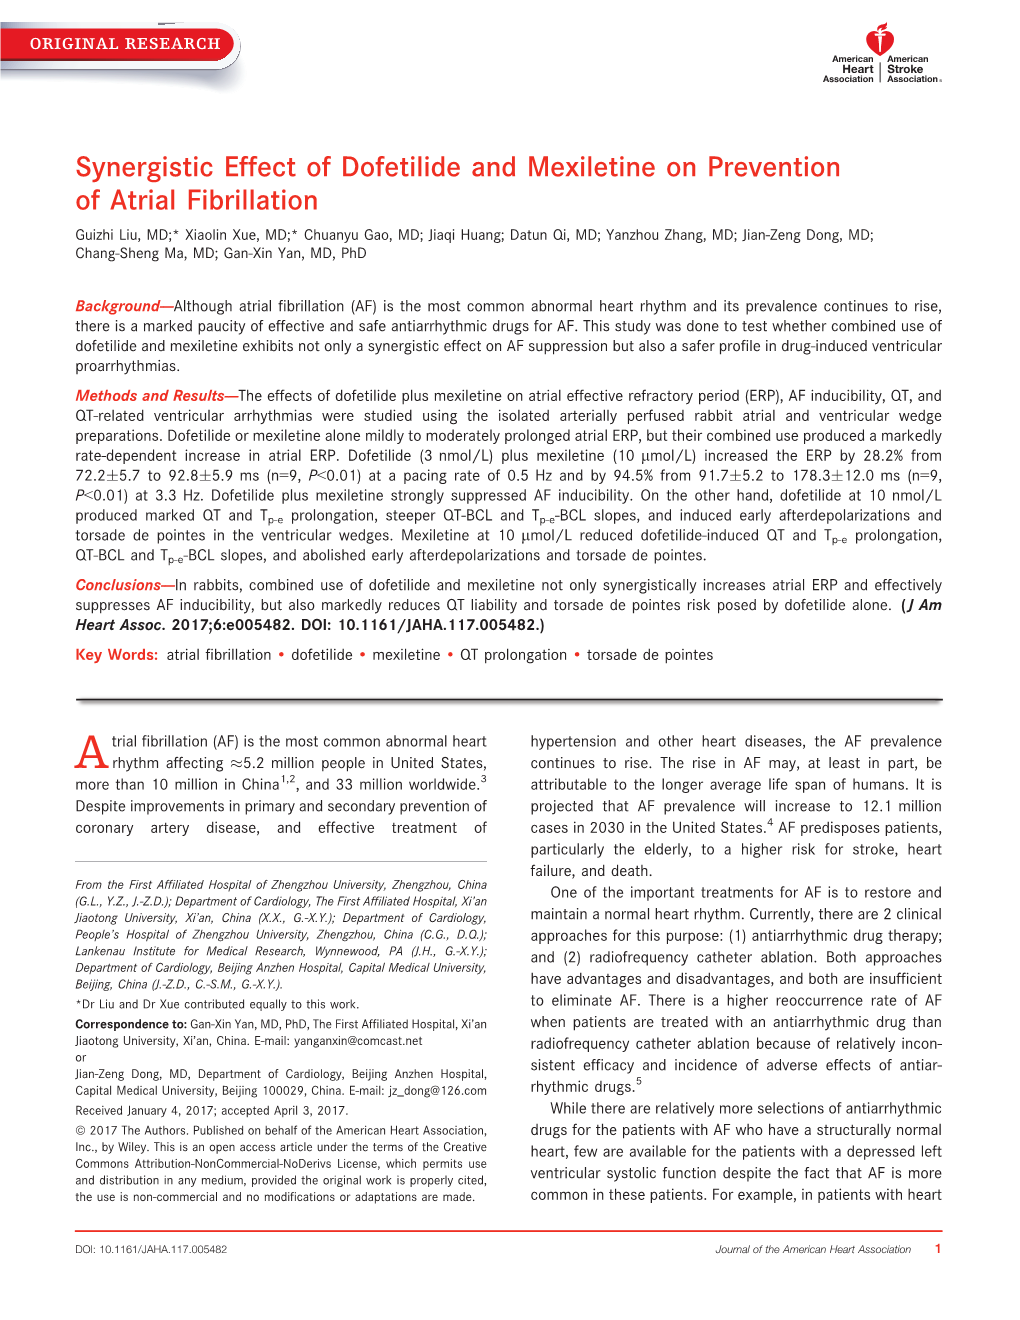 Synergistic Effect of Dofetilide and Mexiletine on Prevention of Atrial